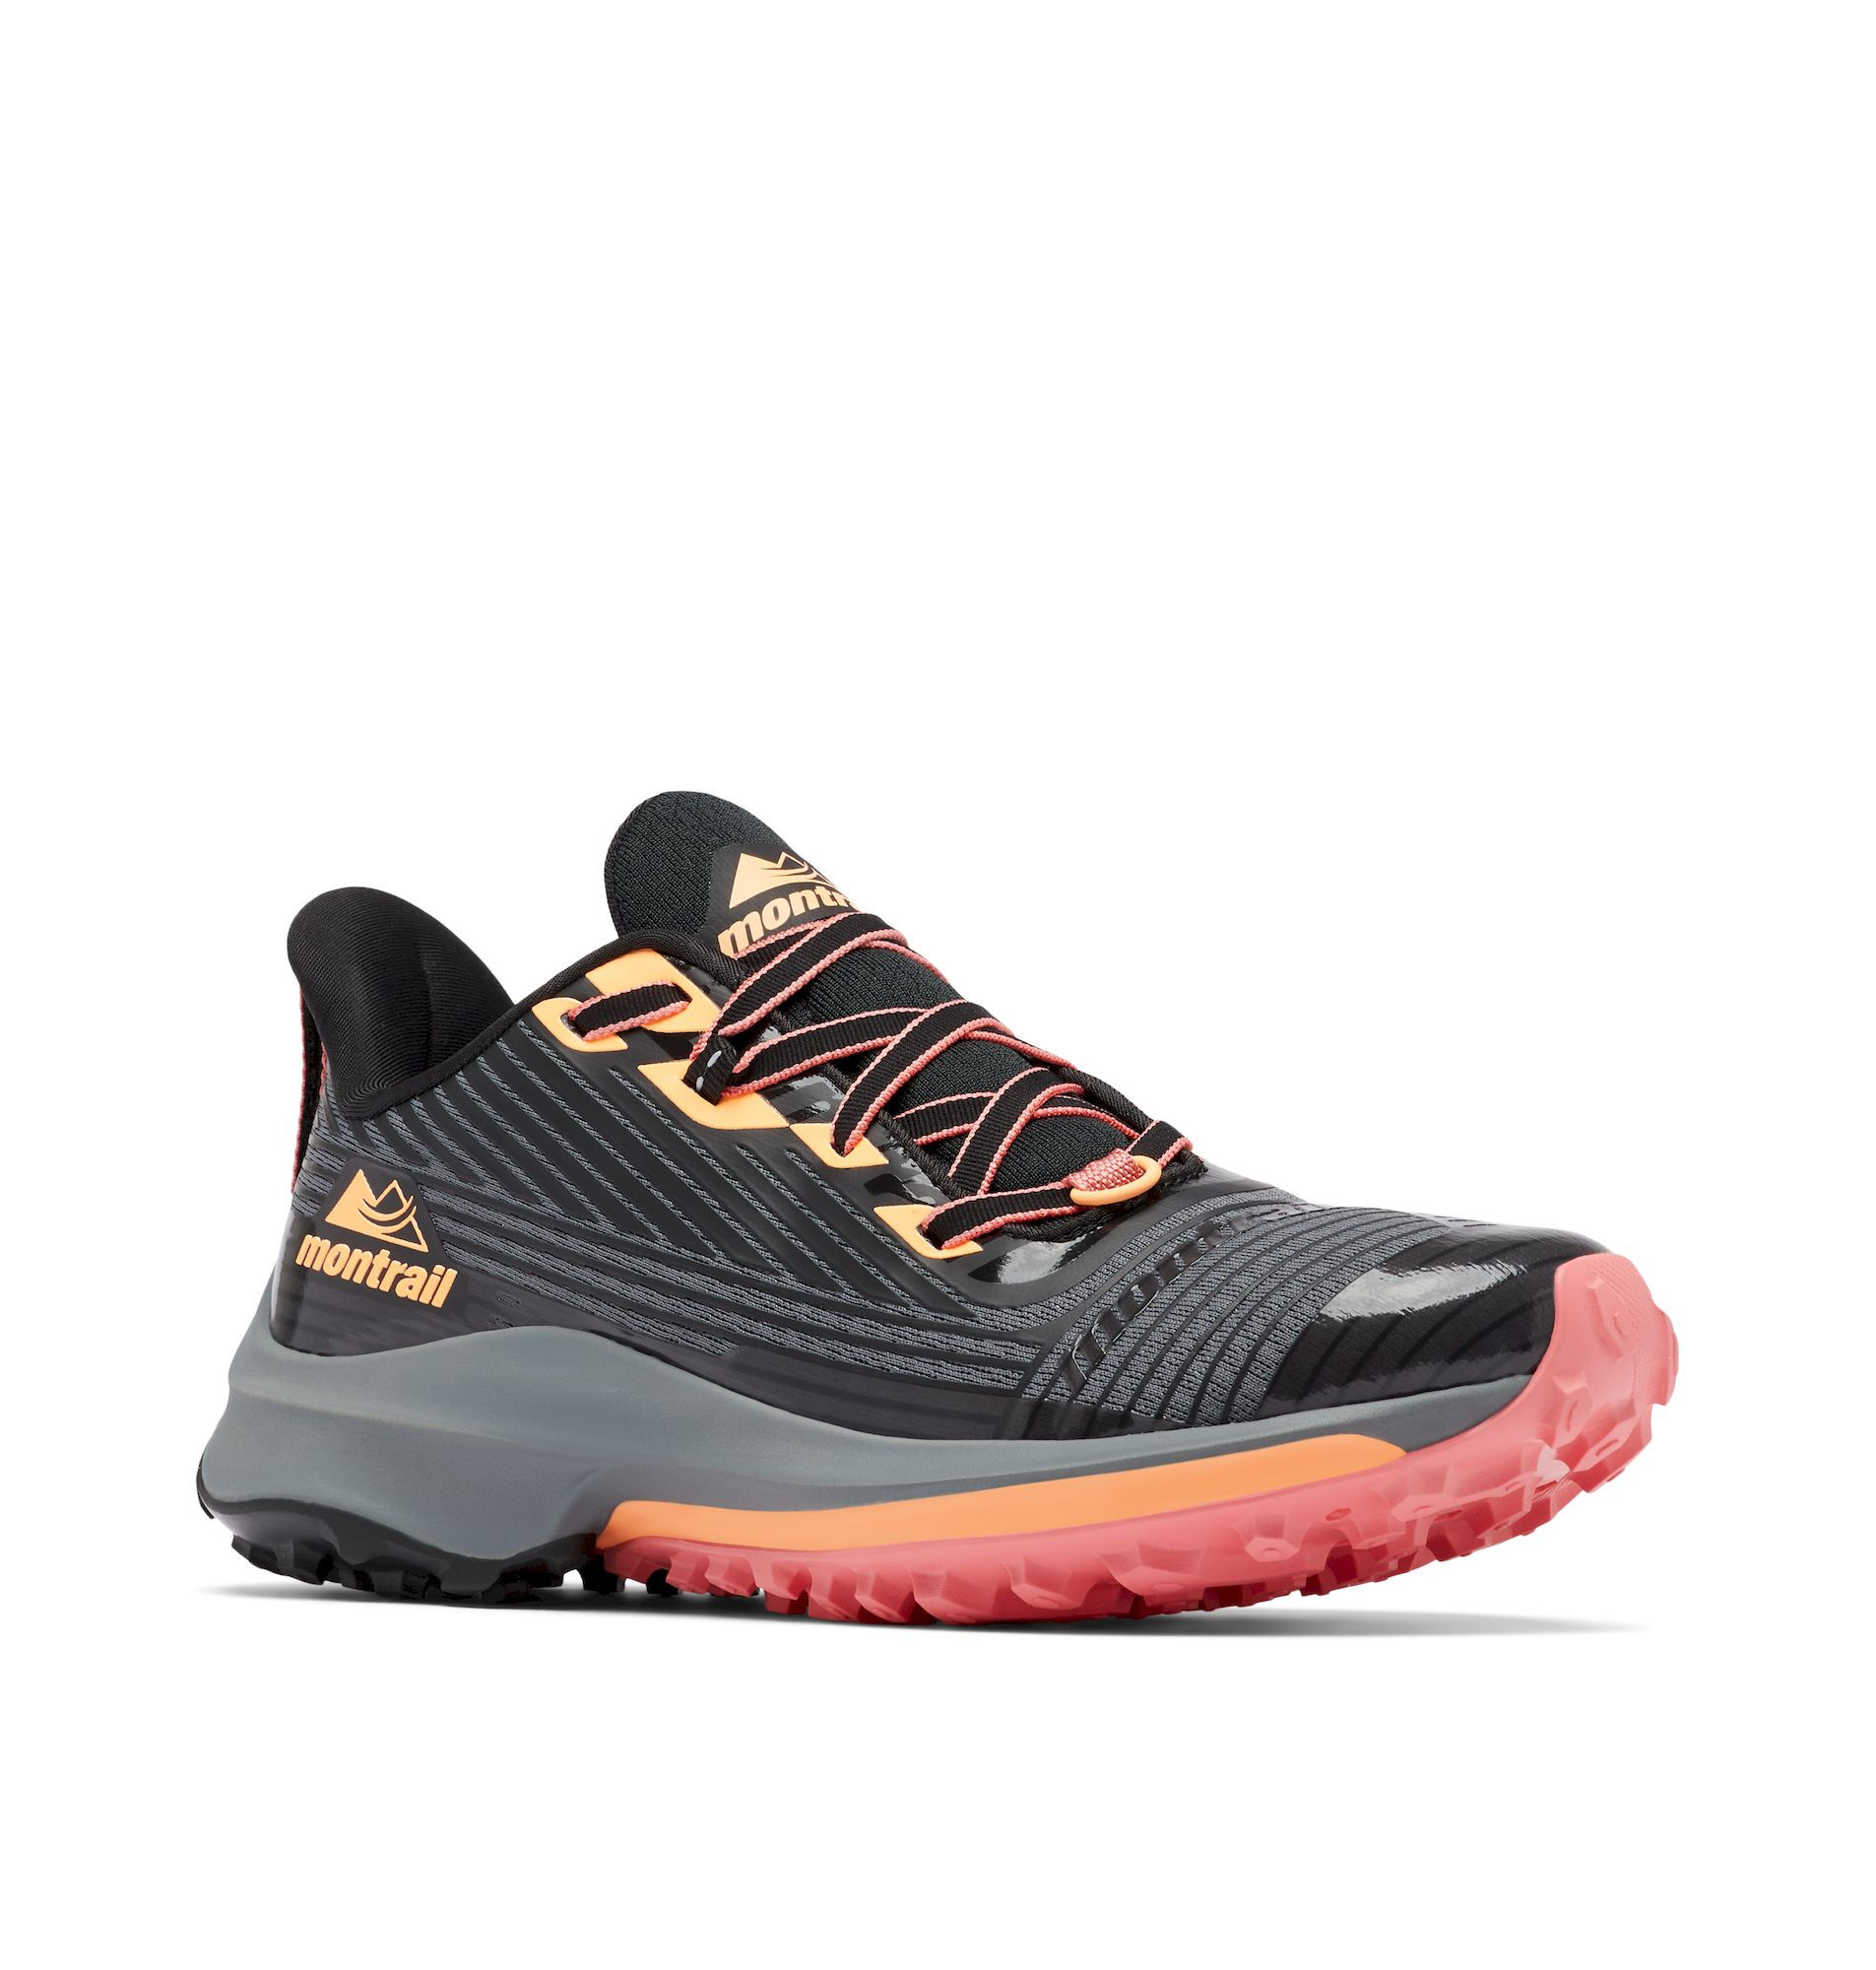 Columbia Montrail Trinity Ag - Trail running shoes - Women's